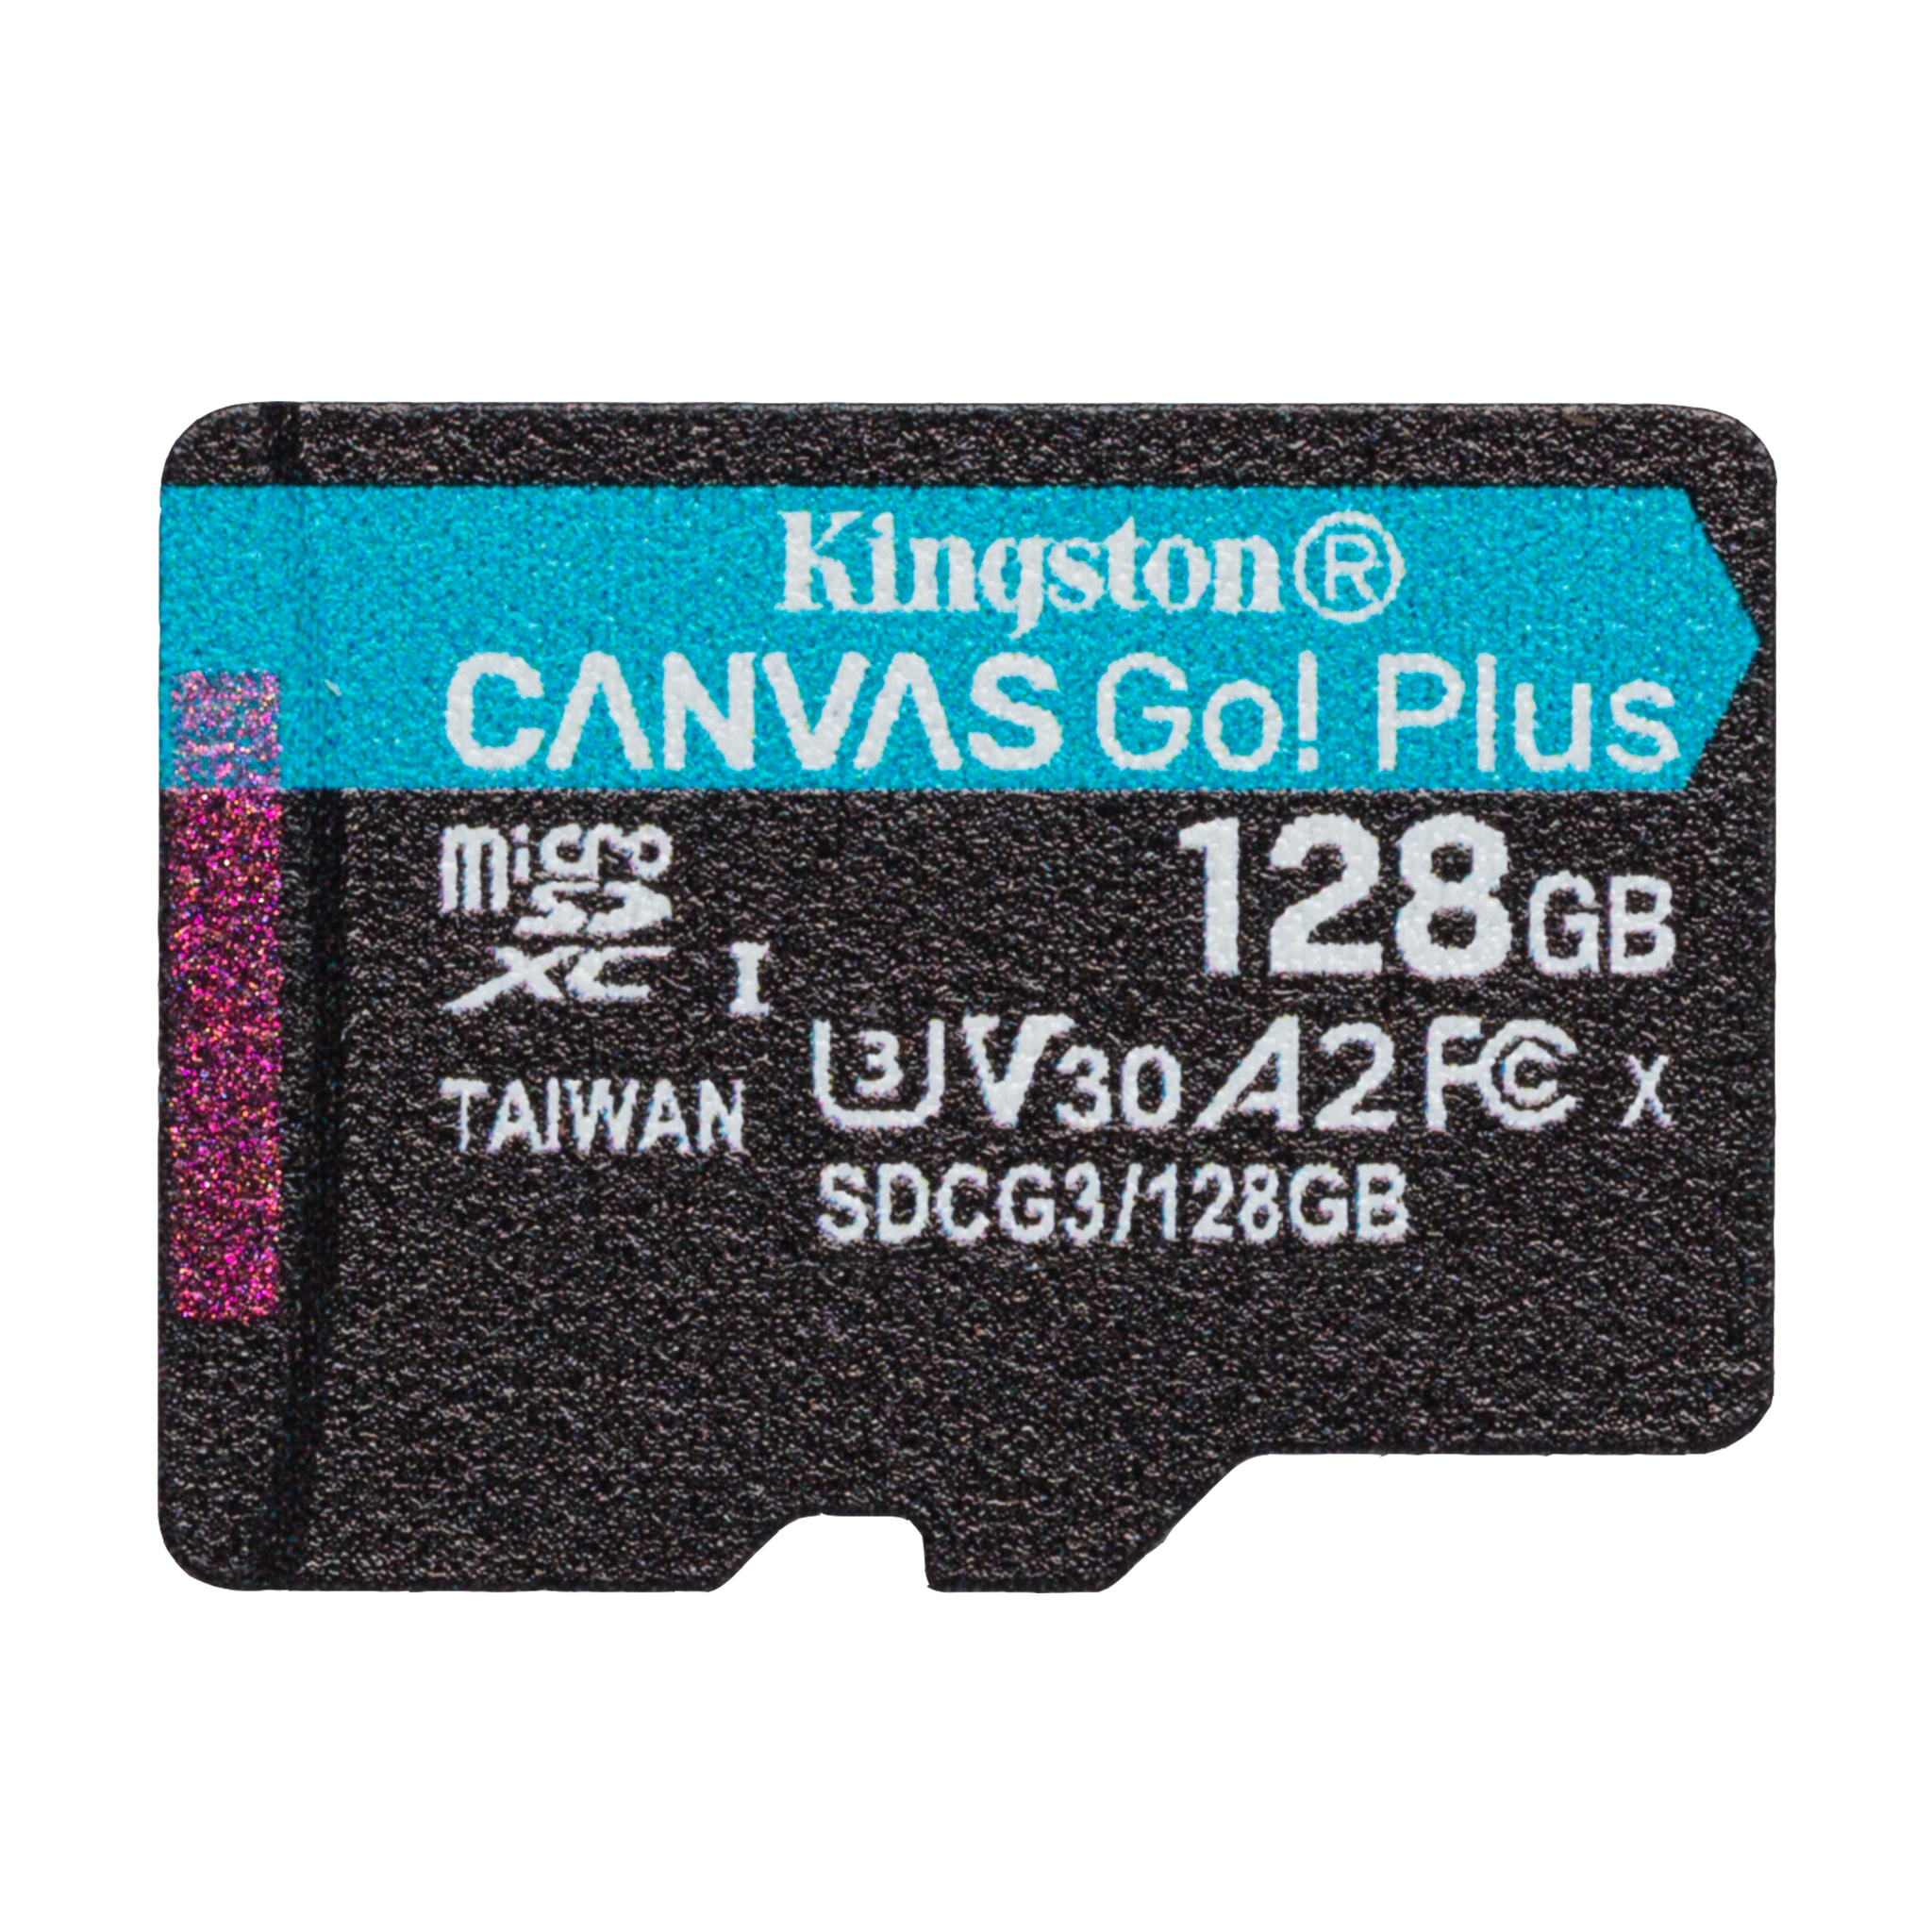 80MBs Works with Kingston Professional Kingston 512GB for LG Escape 3 MicroSDXC Card Custom Verified by SanFlash.